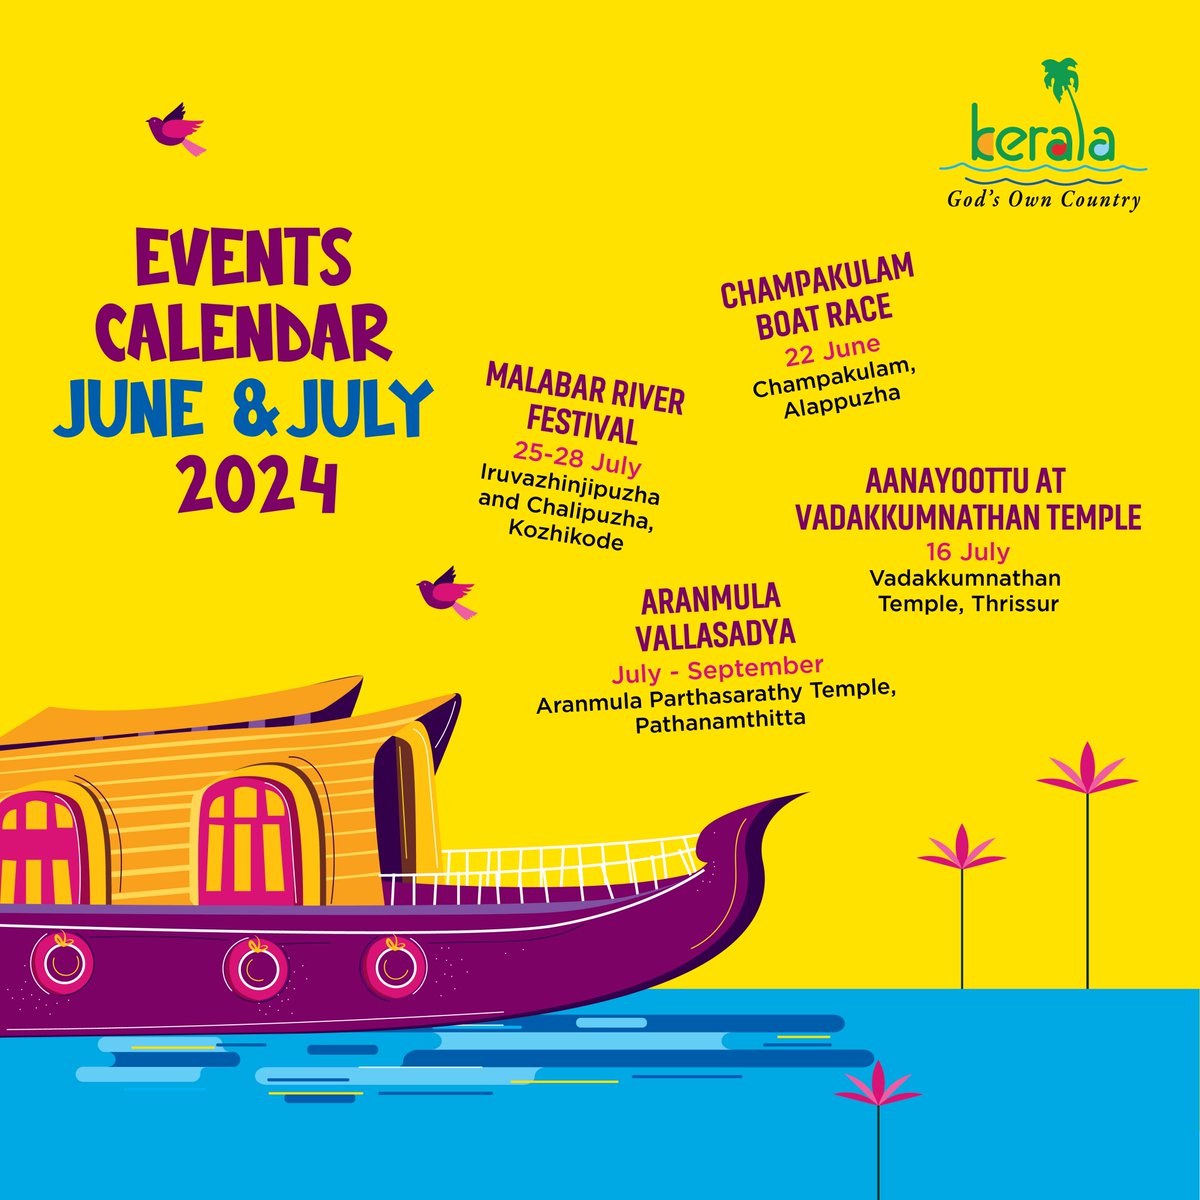 Save the dates as Kerala heads for the season of rains and exciting events! #June #July #Events #Kerala #Art #Culture #KeralaTourism